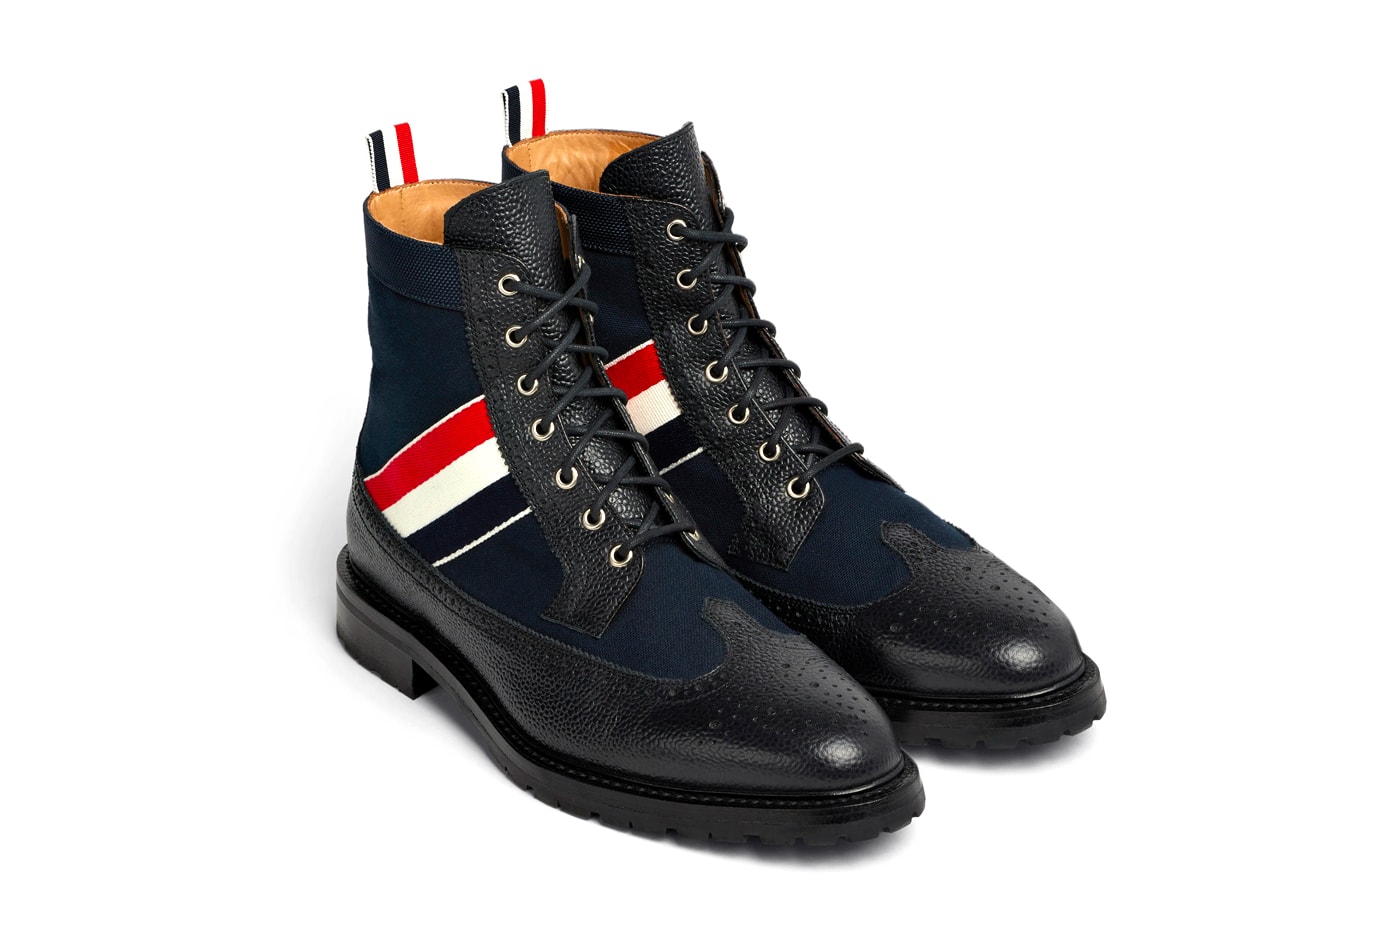 Thom Browne RWB Webbing Longwing Boot navy green red white blue tricolor canvas pebble grain leather waxed canvas upper lace up fastening calfskin lining